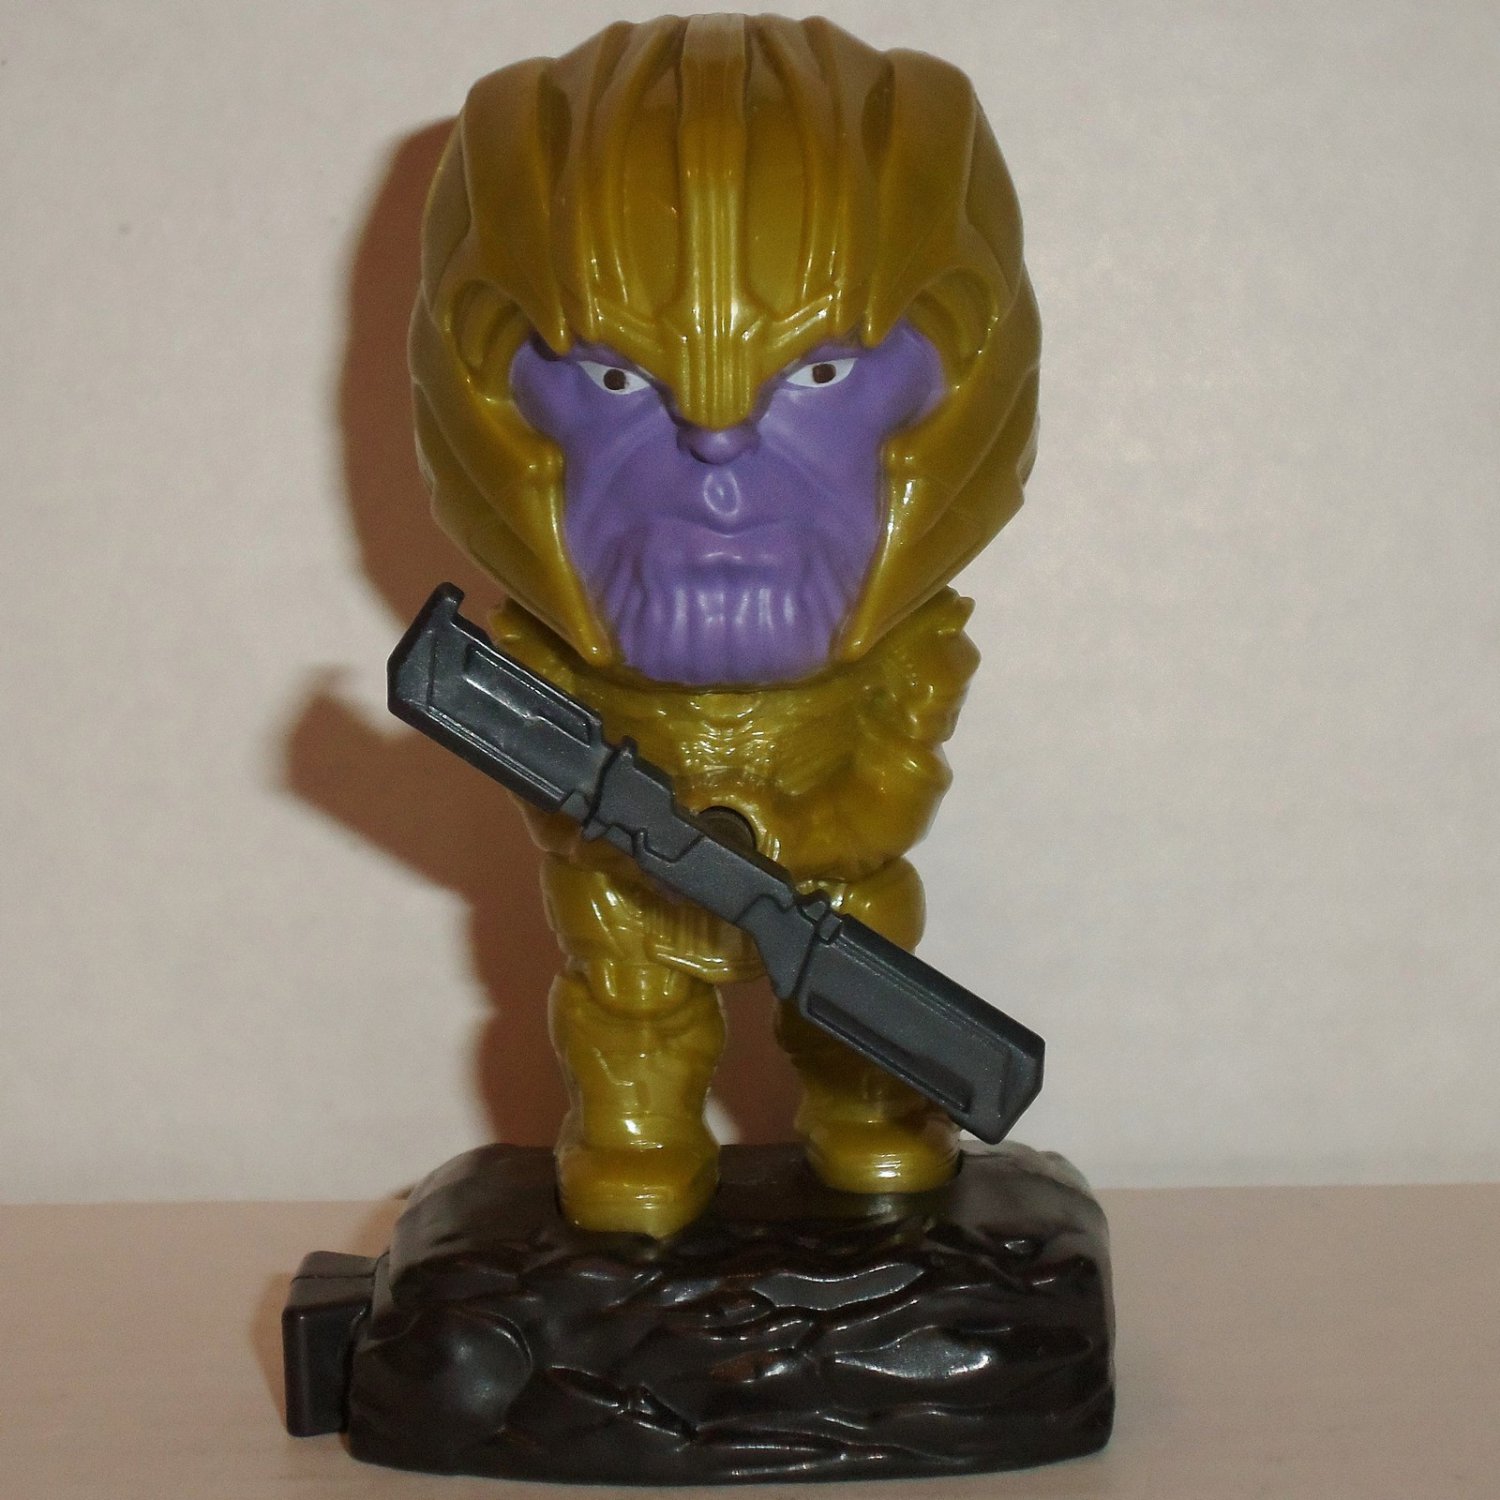 McDonald's 2019 Avengers End Game Thanos Figure Happy Meal